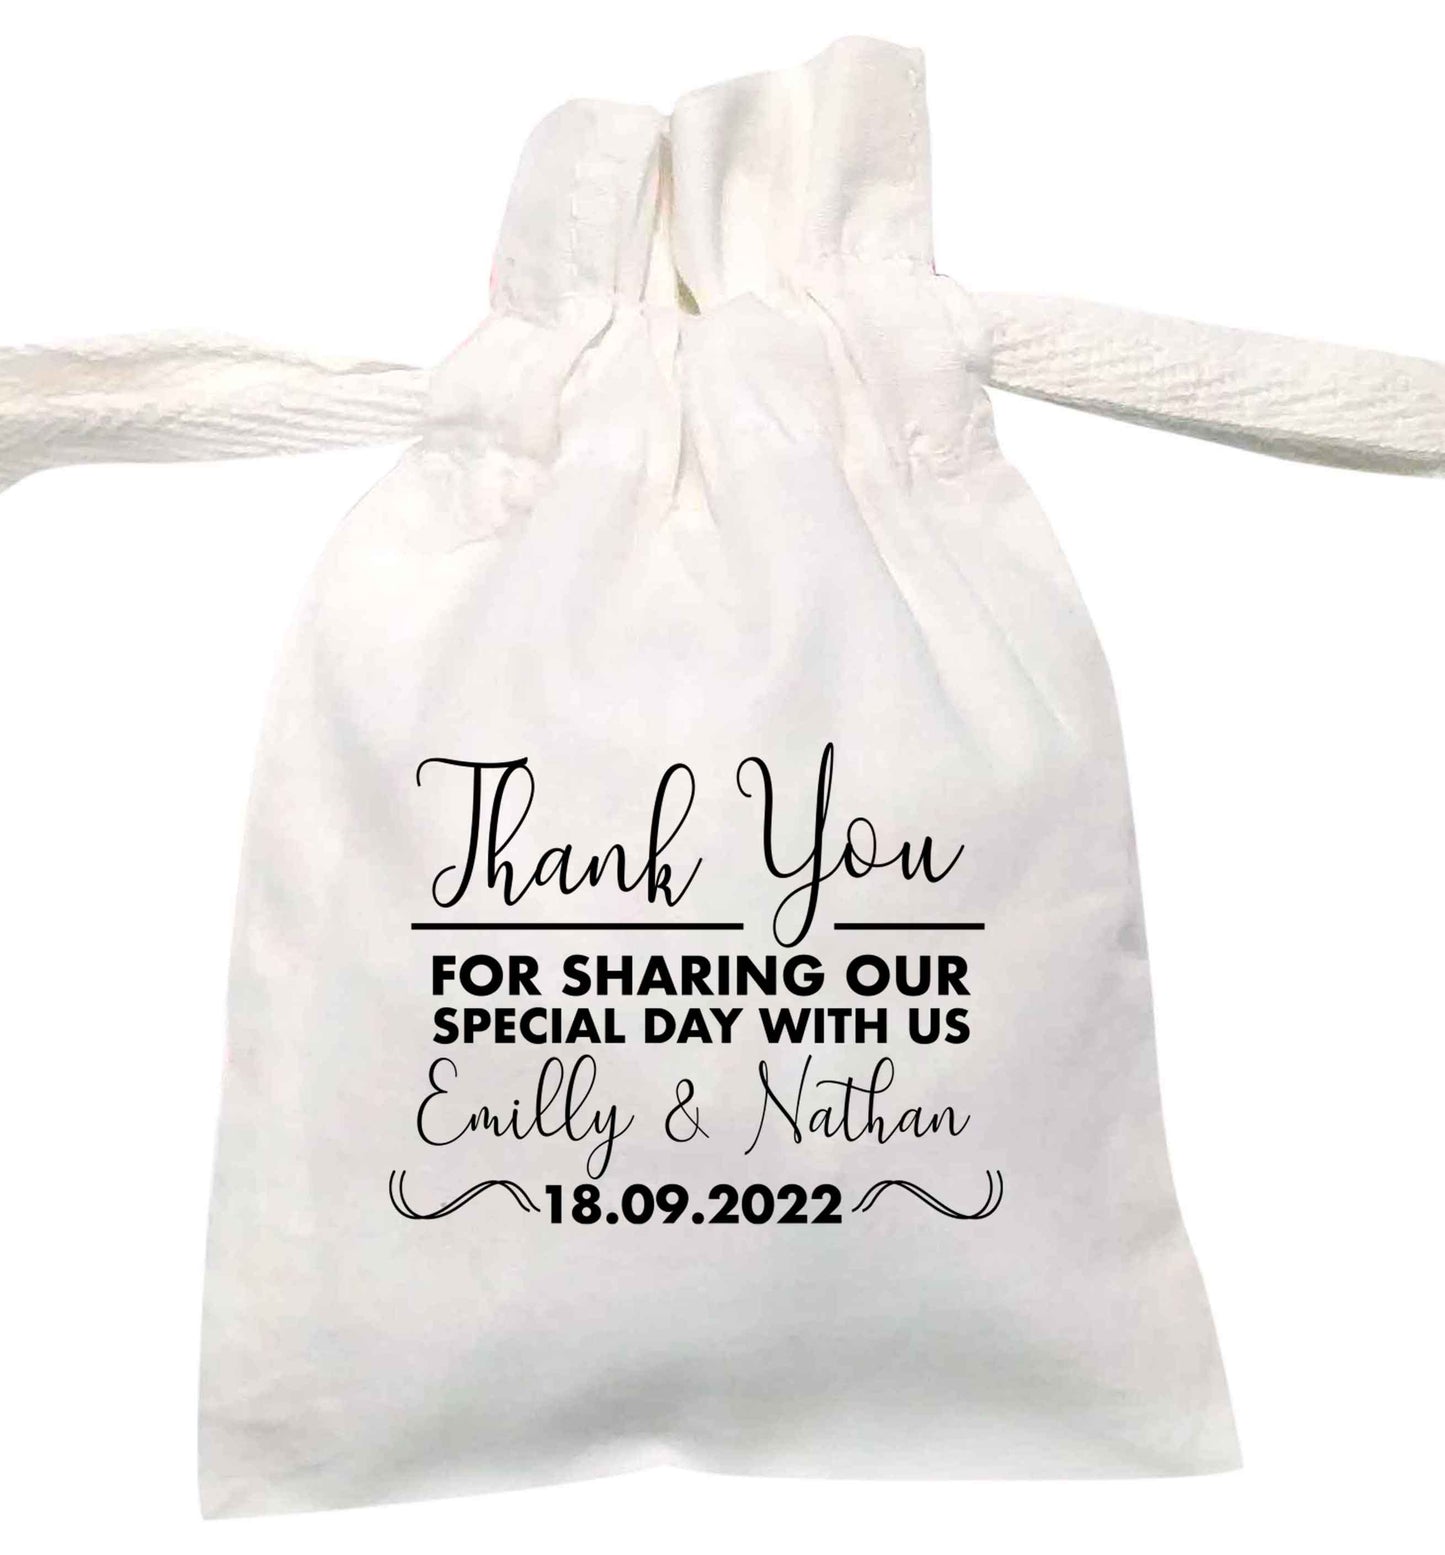 Thank you for sharing our special day | XS - L | Pouch / Drawstring bag / Sack | Organic Cotton | Bulk discounts available!